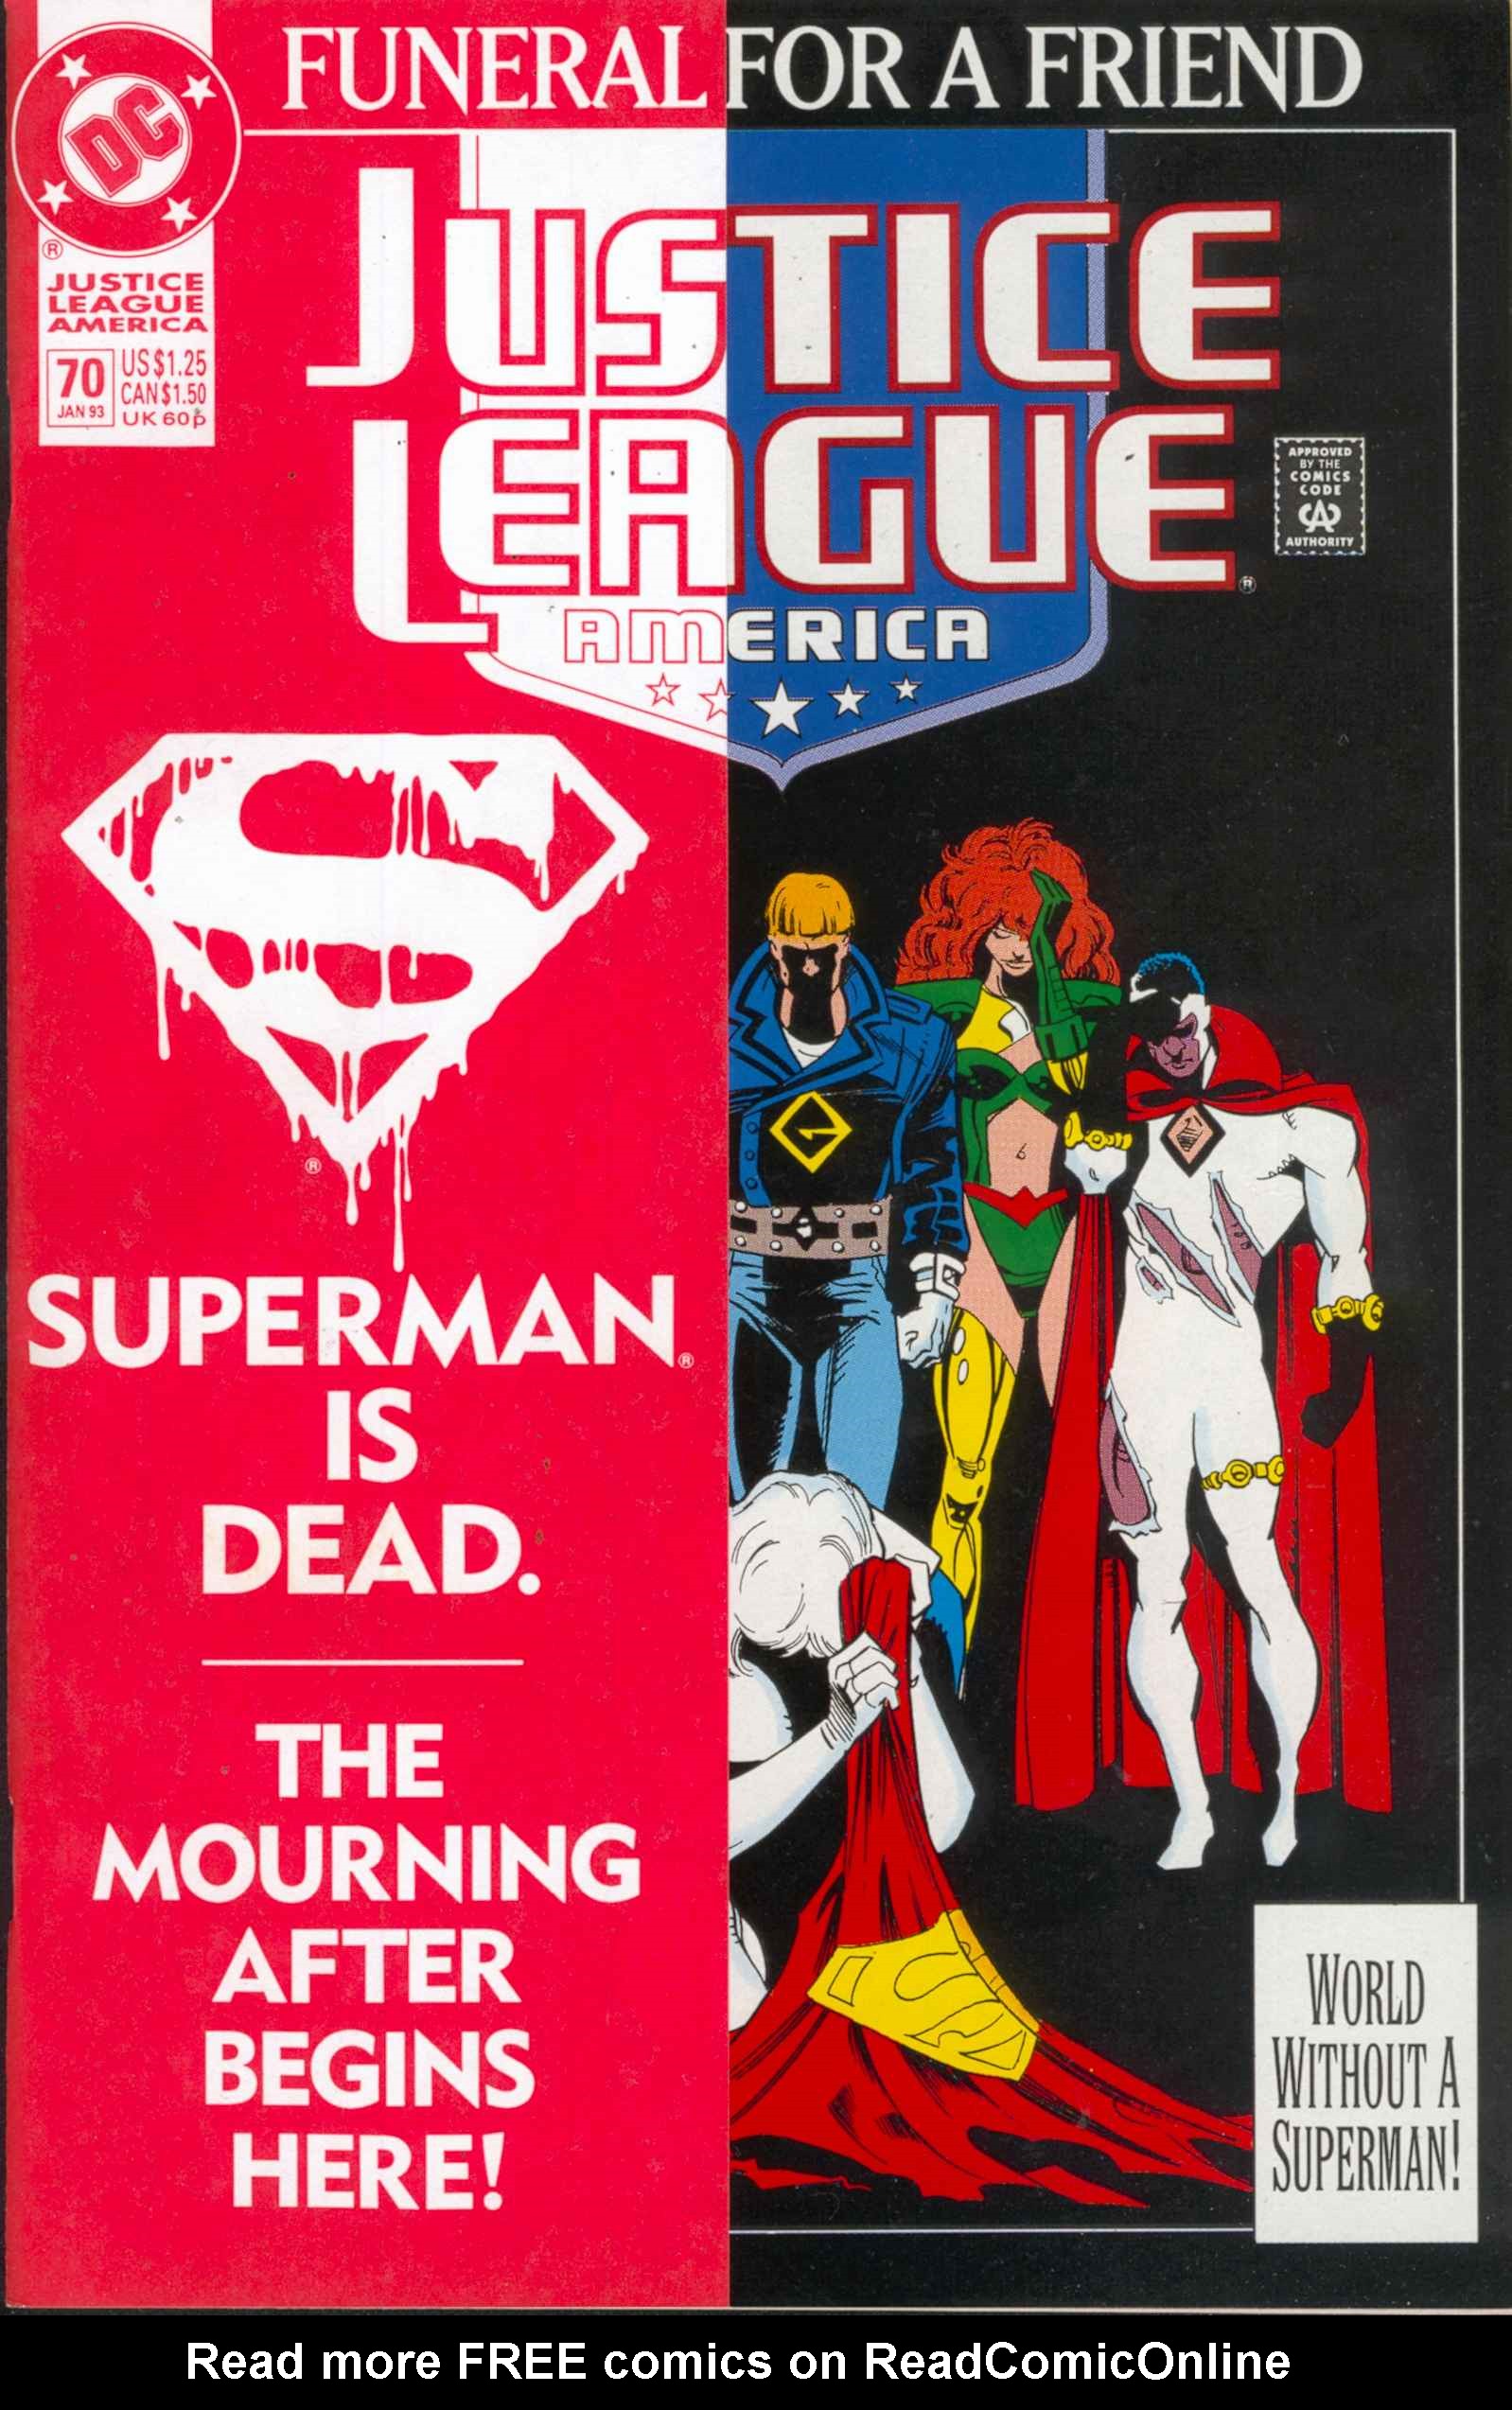 Read online Justice League America comic -  Issue #70 - 1